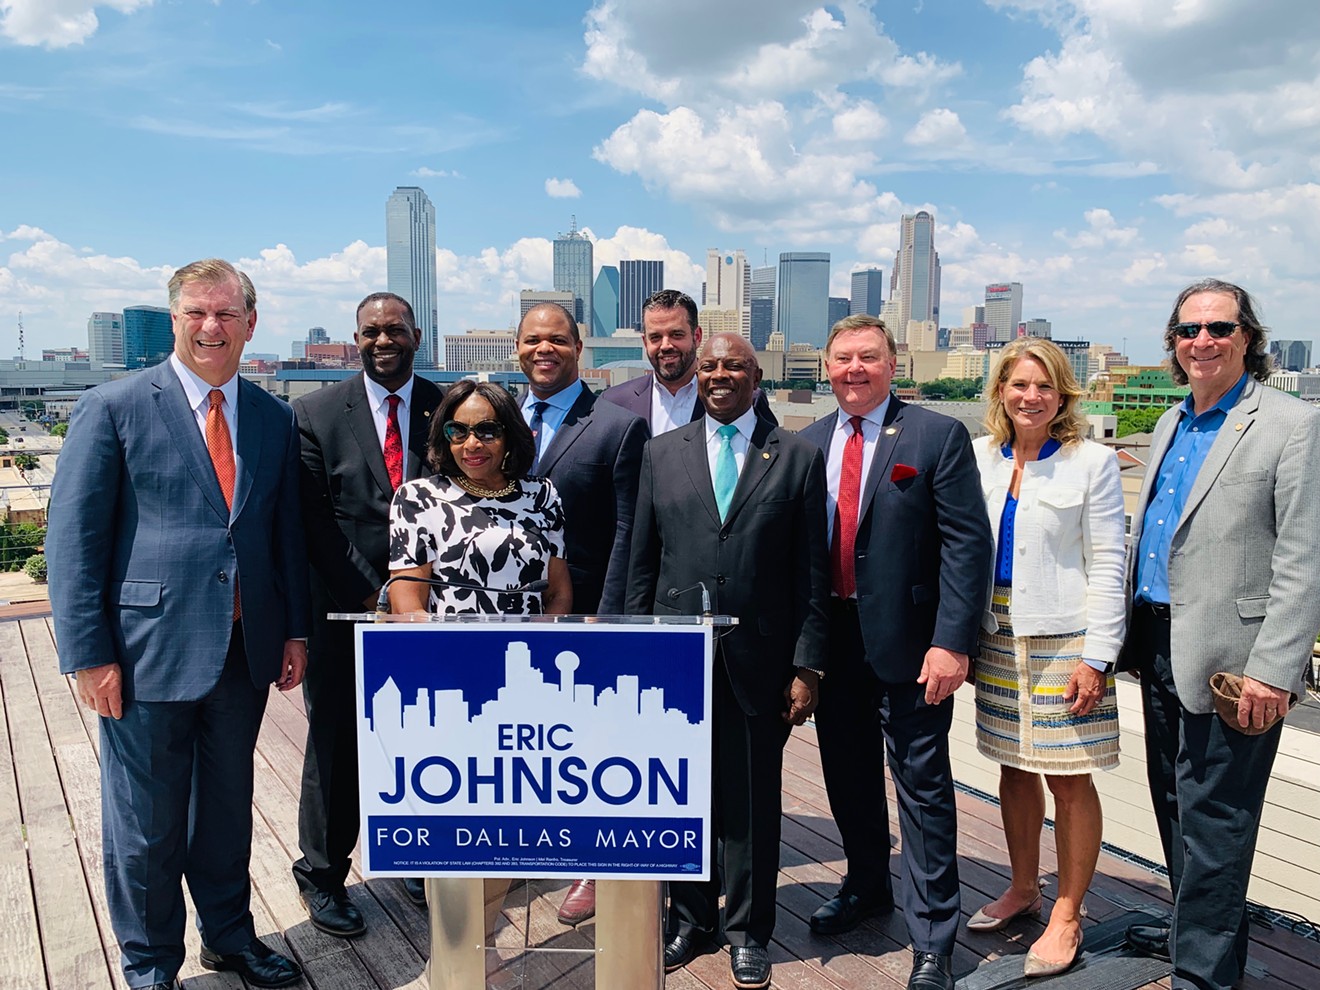 From left: Dallas Mayor Mike Rawlings, Dallas City Council member Casey Thomas, City Council member Carolyn King Arnold, state Representative and mayoral candidate Eric Johnson, City Council member Adam McGough, City Council member Tennell Atkins, City Council member Rickey Callahan, City Council member Jennifer Gates and City Council member Lee Kleinman